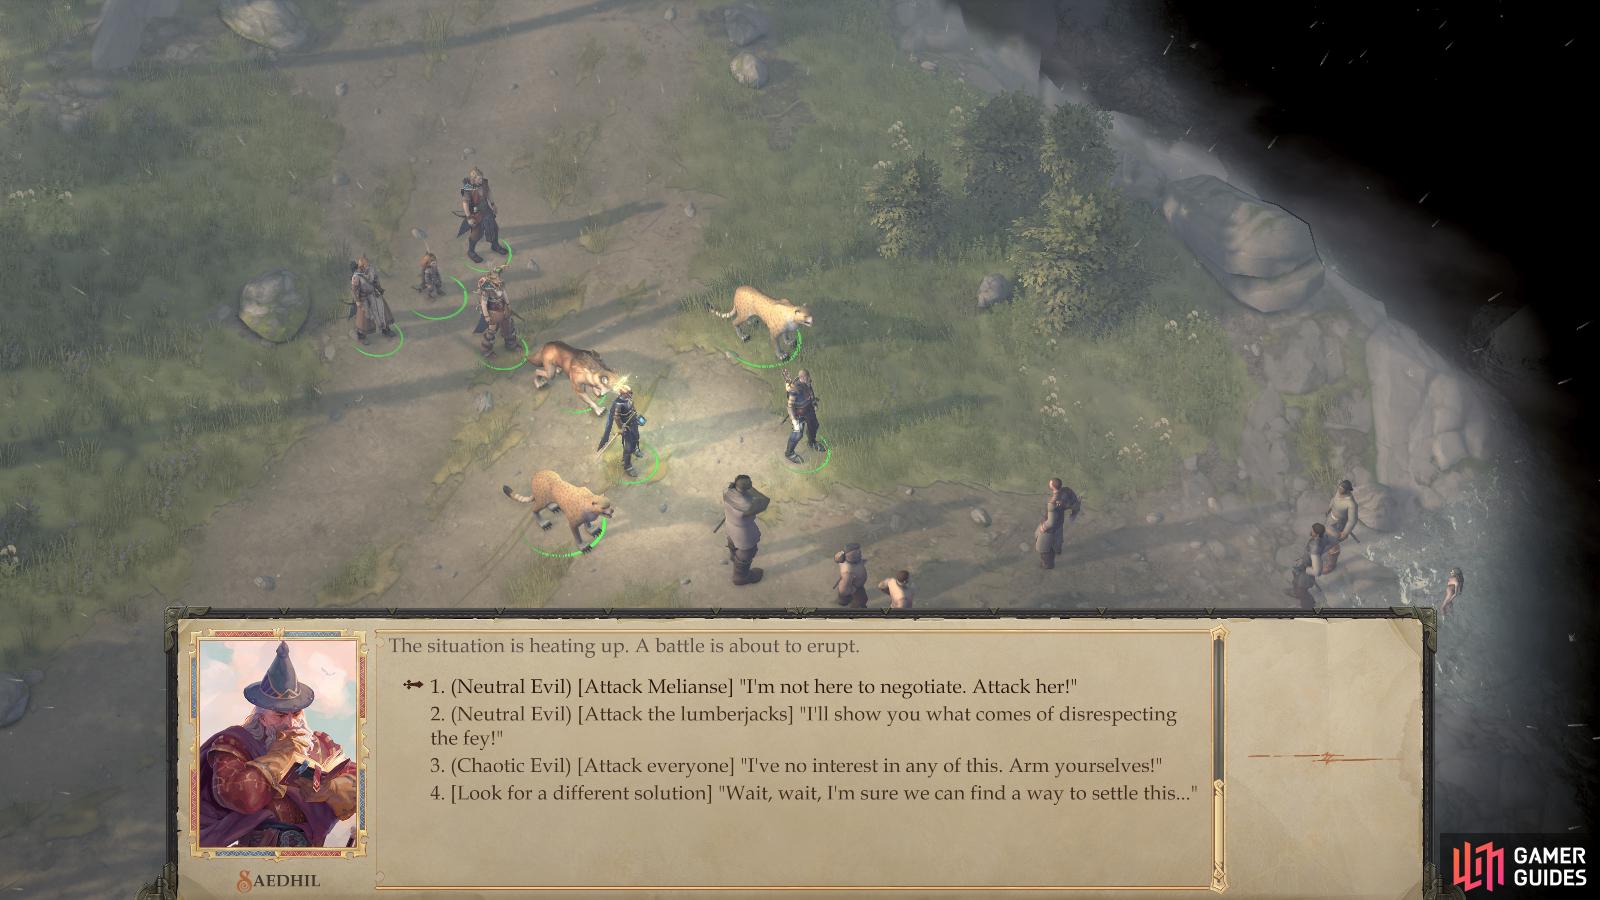 You can also outright pick a fight with either side via dialogue